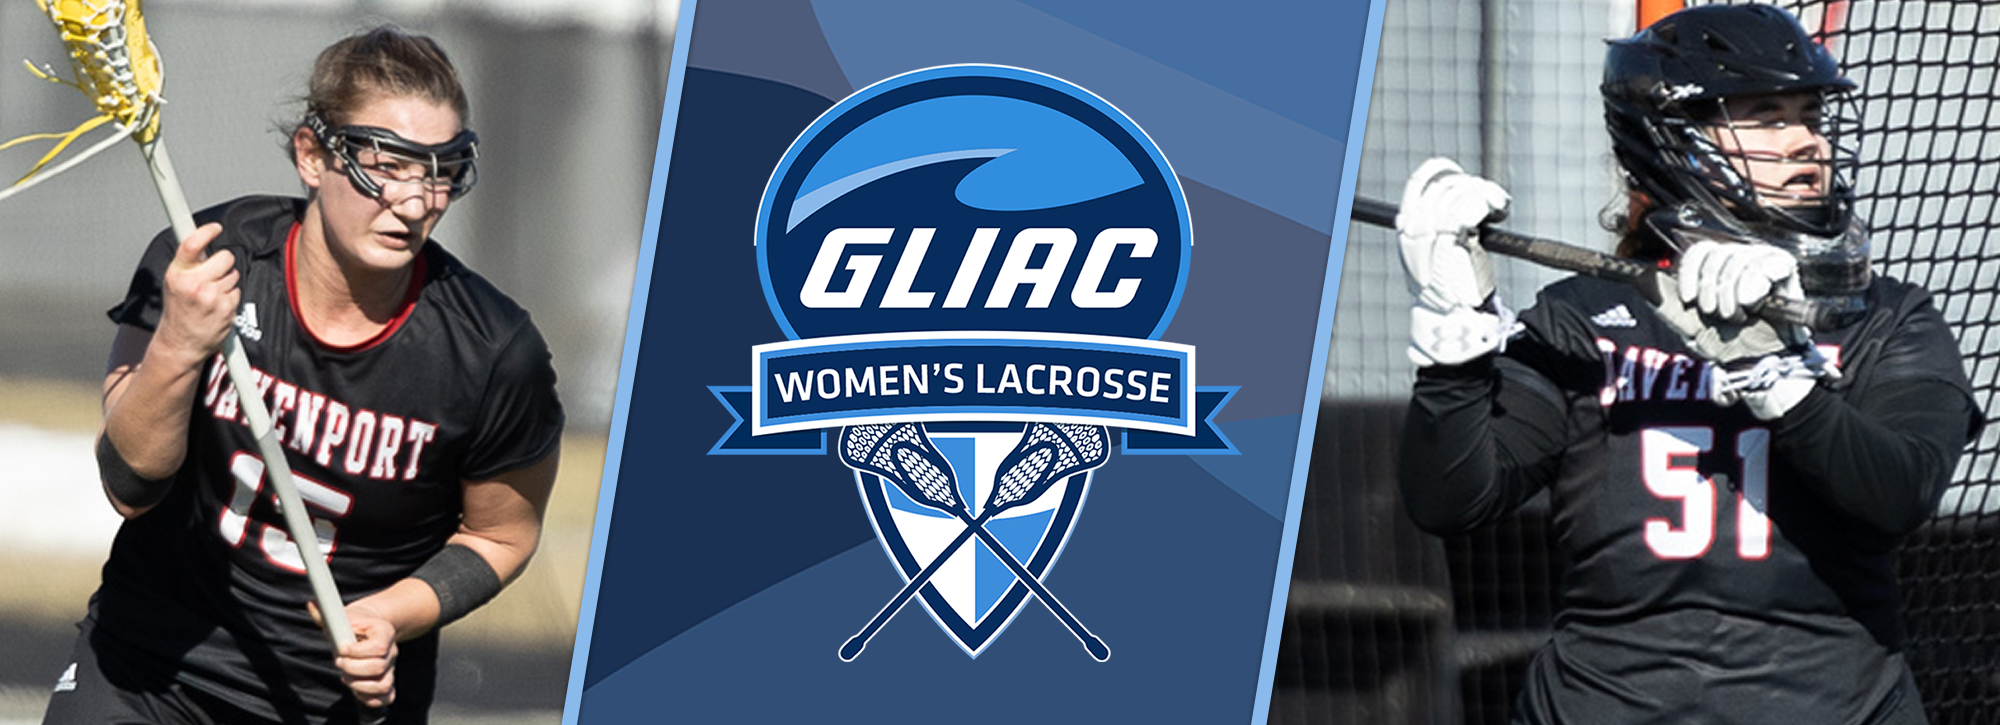 Davenport's Glynn and Latus receive women's lacrosse weekly awards